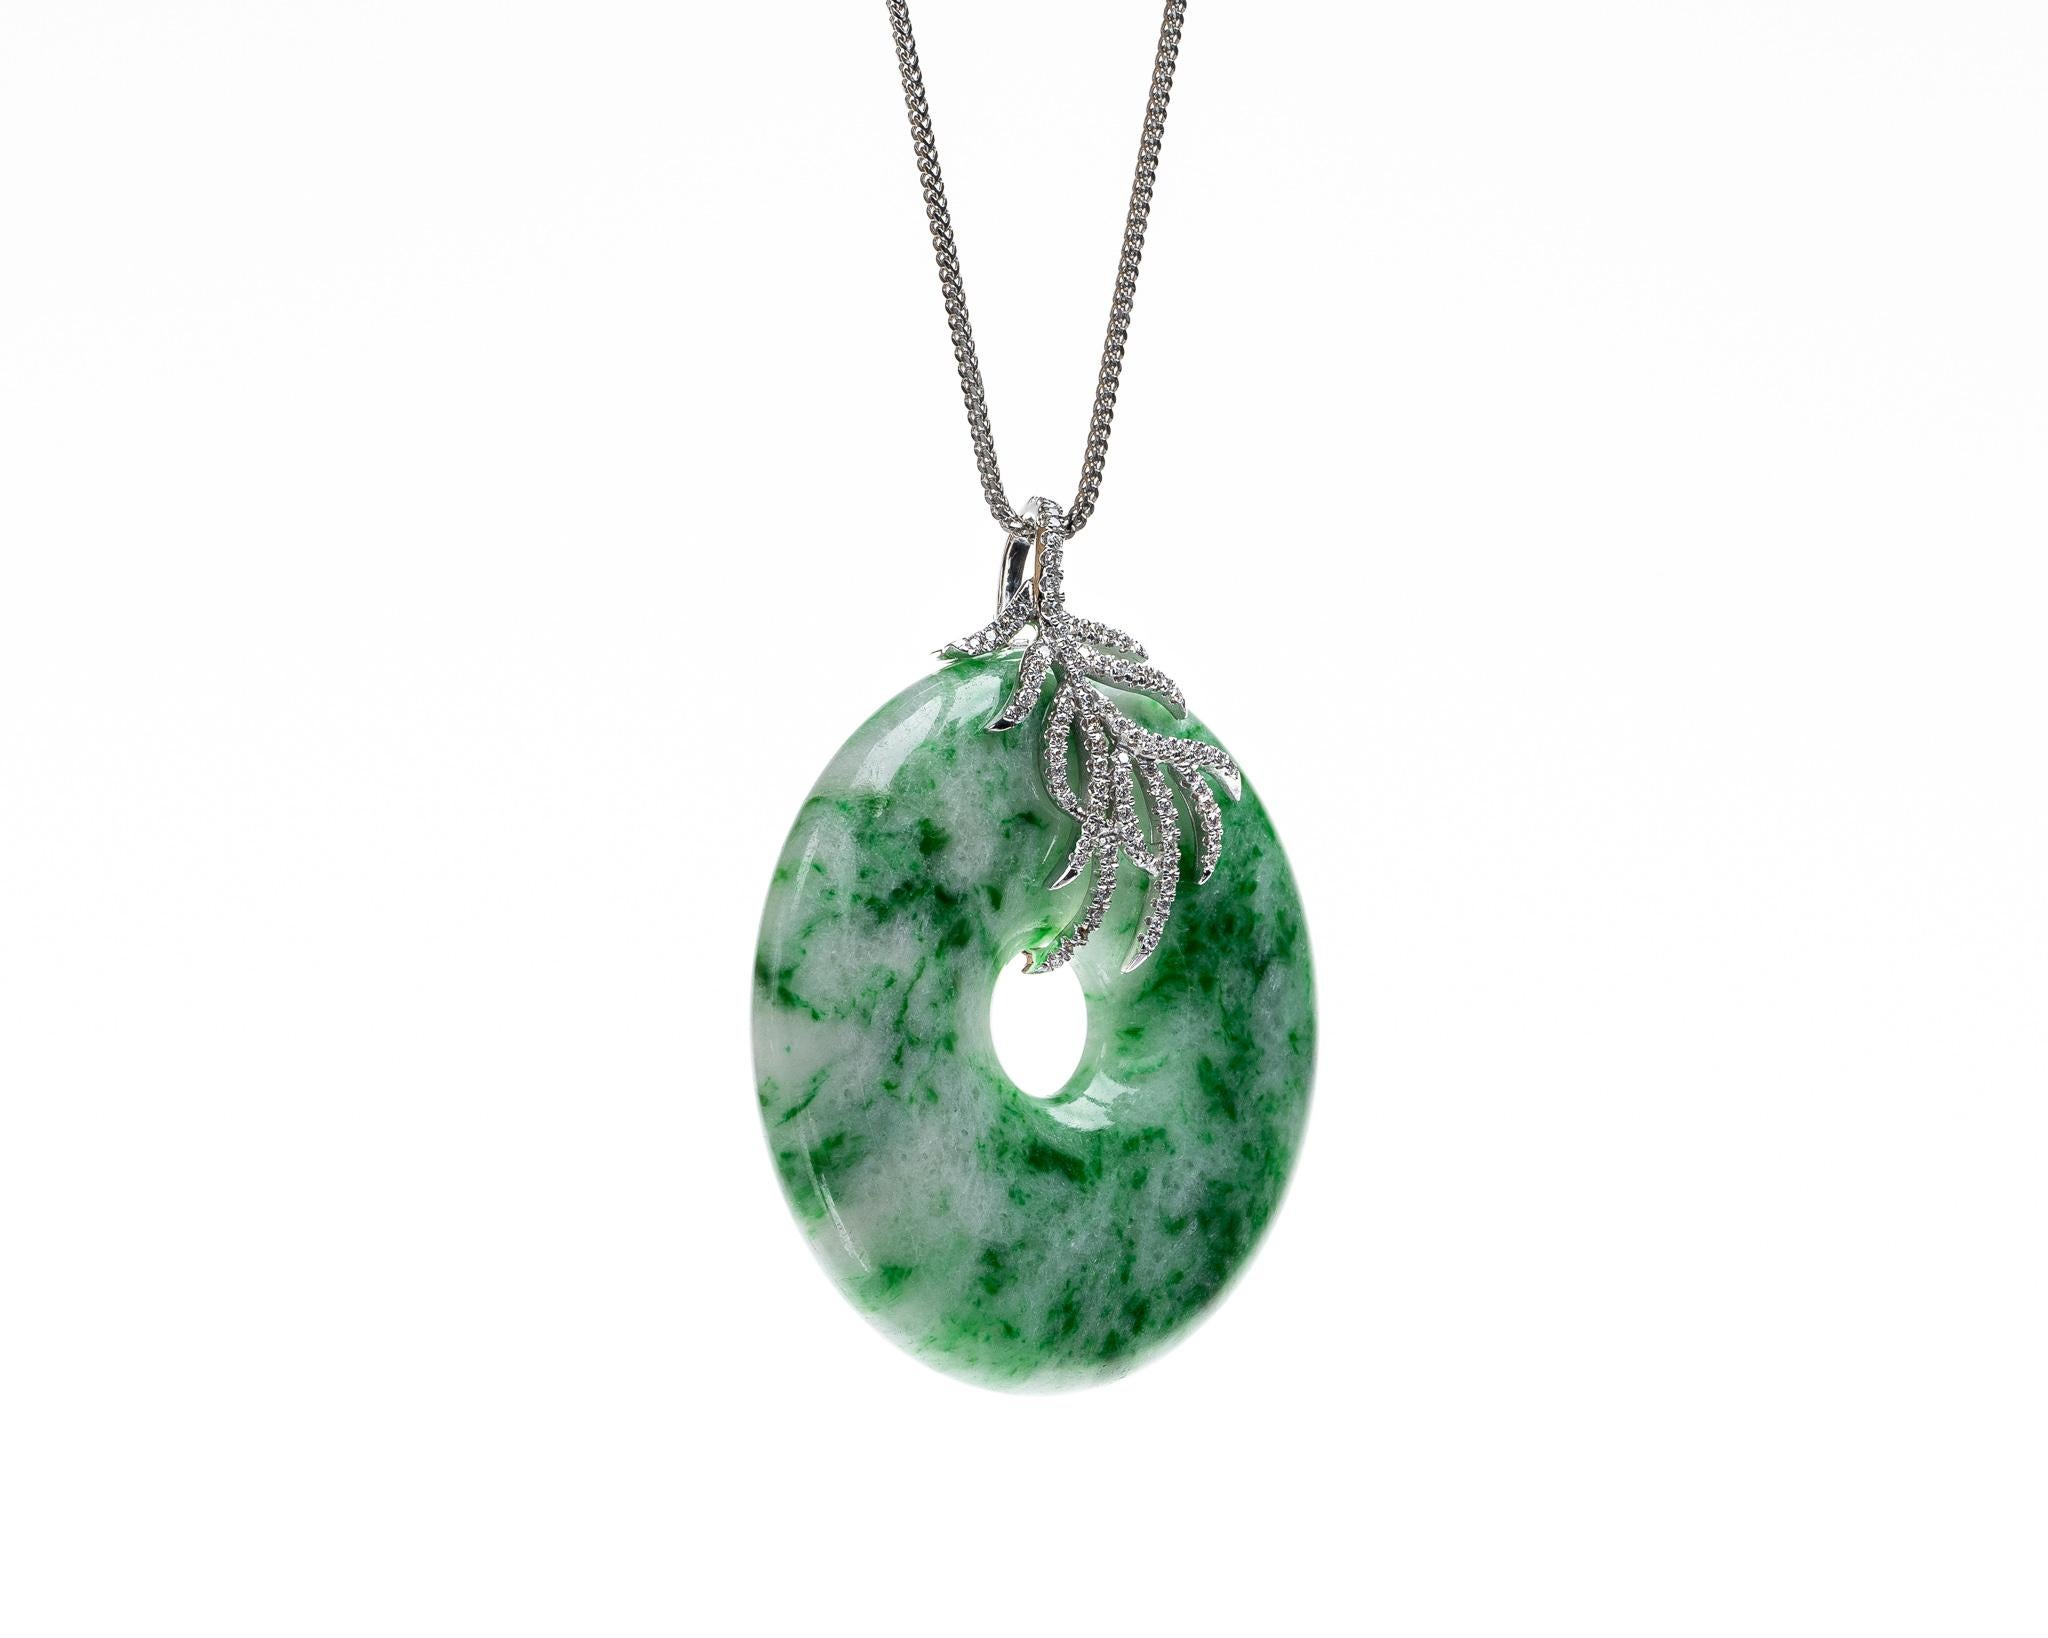 This is an all natural, untreated jadeite jade carved pi disc and diamond pendant set on an 18K white gold and diamond bail.  The carved pi disc symbolizes peace.   

It measures 1.57 inches (39.9mm) x 1.89 inches (48.1mm) with thickness of 0.25